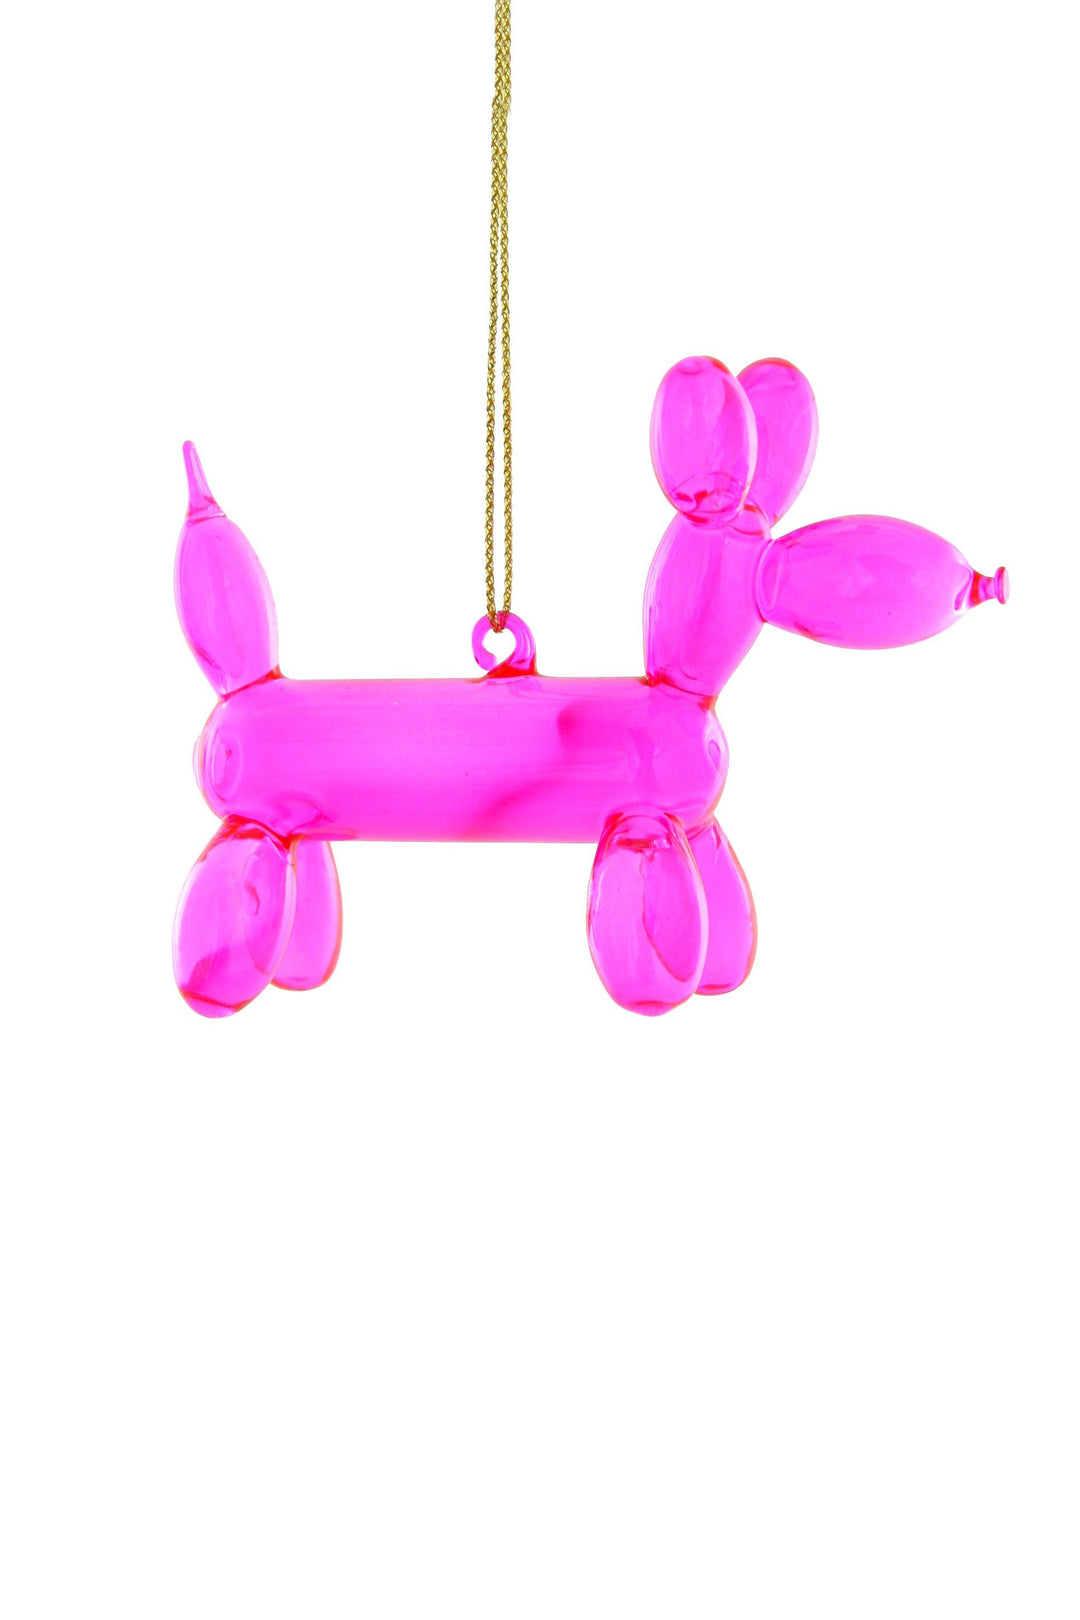 BALLOON PUP-PINK - Design for the PPL